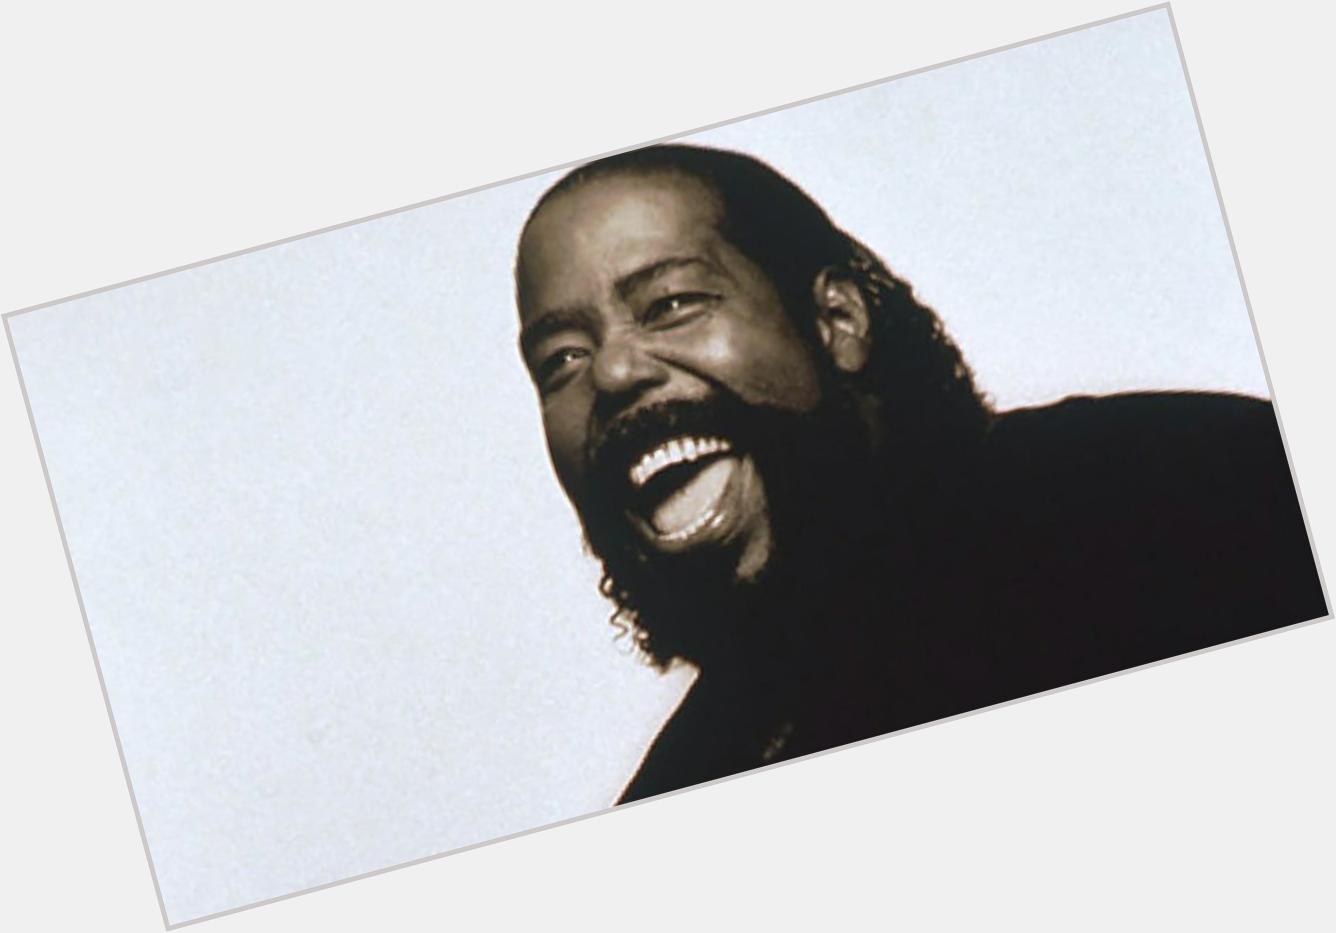 HAPPY BIRTHDAY TO BARRY WHITE
REGALITY AND GENIALITY IN SPADES
THRIVE IN PARADISE 